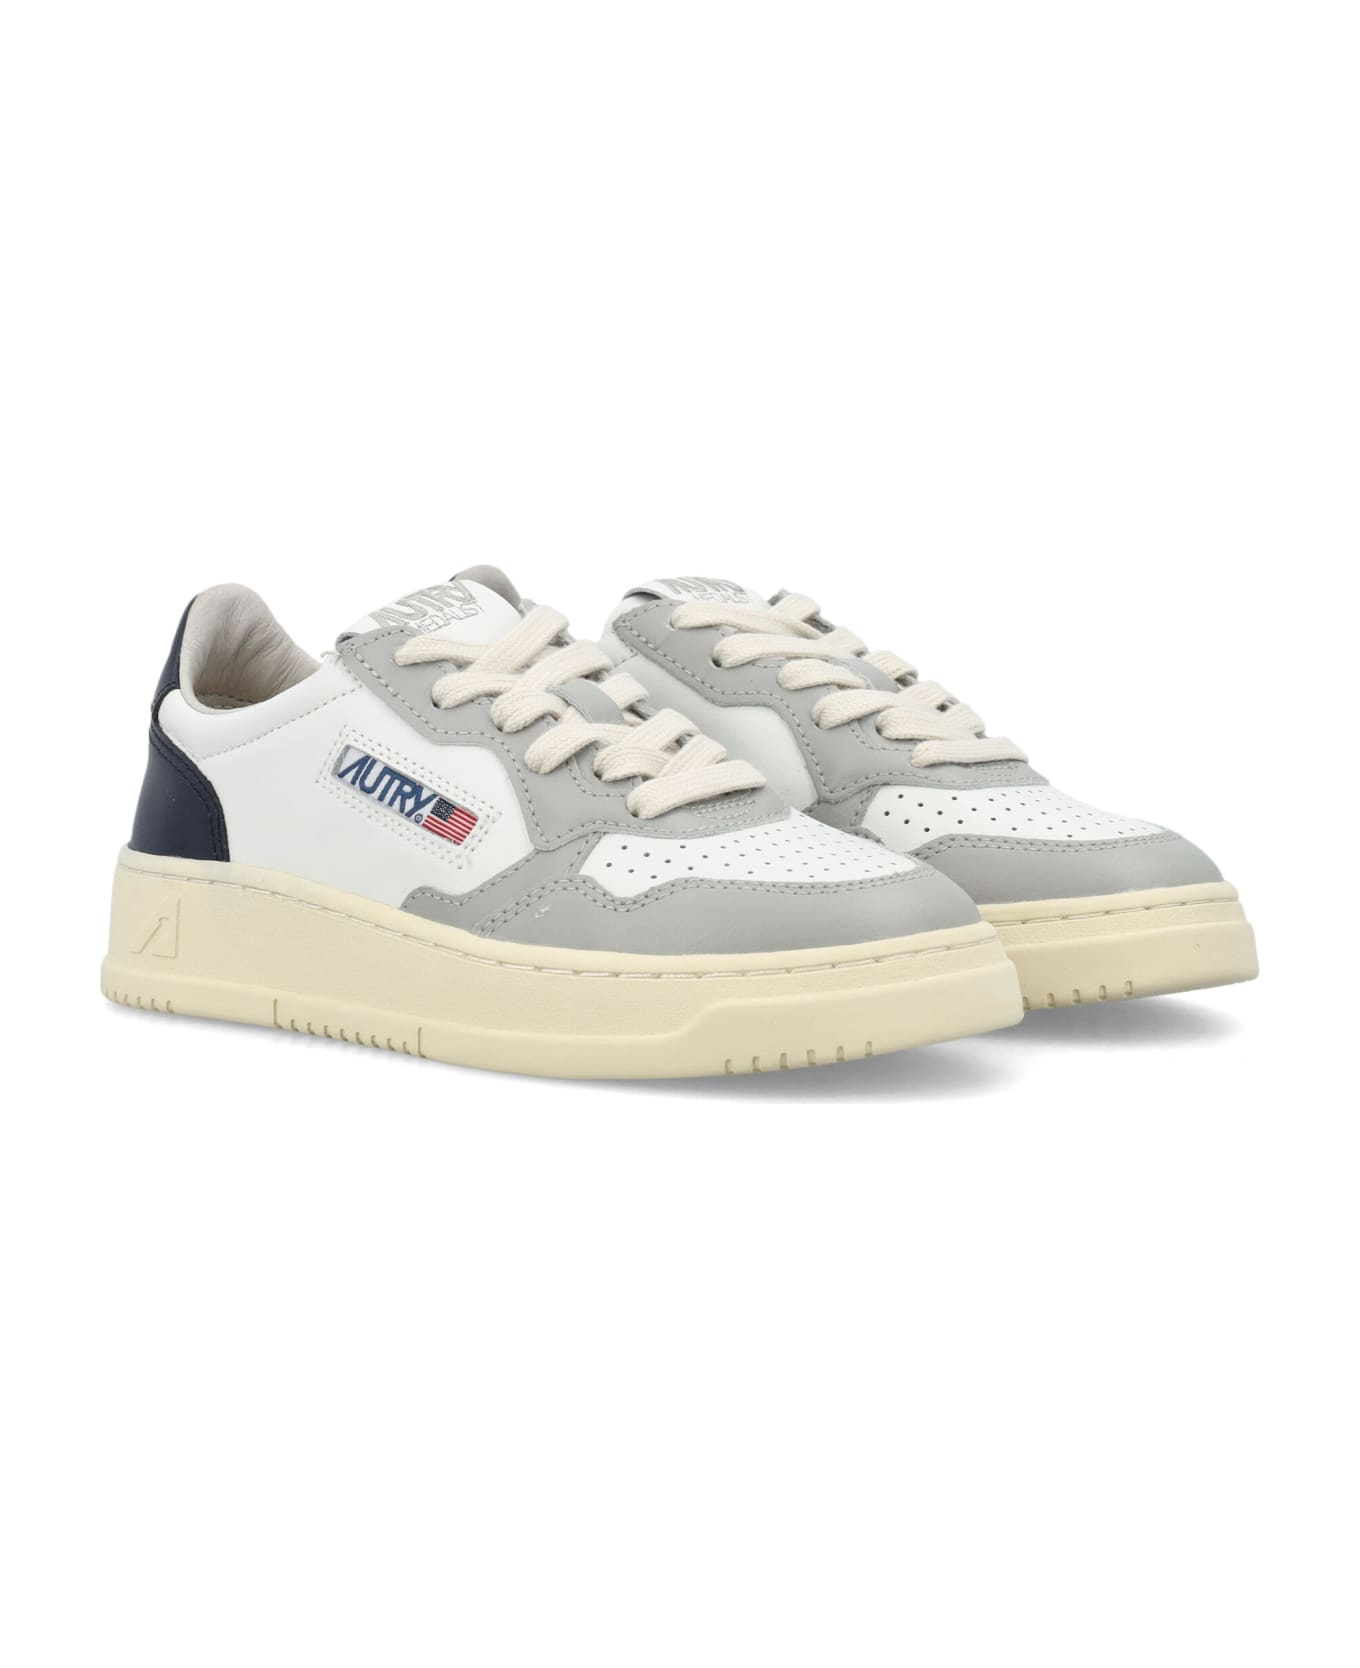 Autry Medalist Low Sneakers - WHITE GREY BLUE